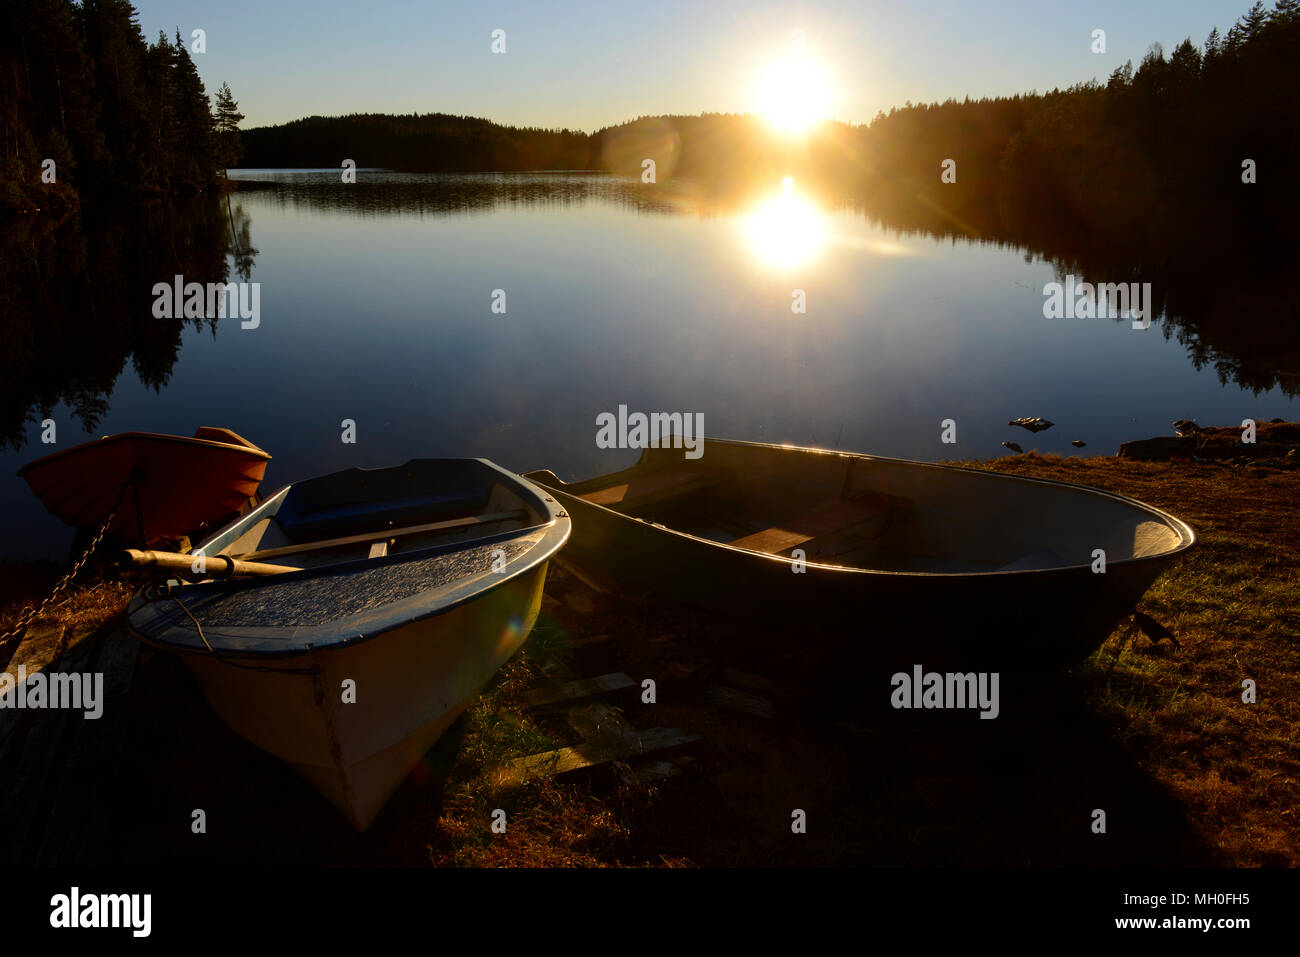 Evening sun sets on Norwegian lake with small boats in foreground at Nordbysjøen near Lillestrøm and Oslo, Norway Stock Photo